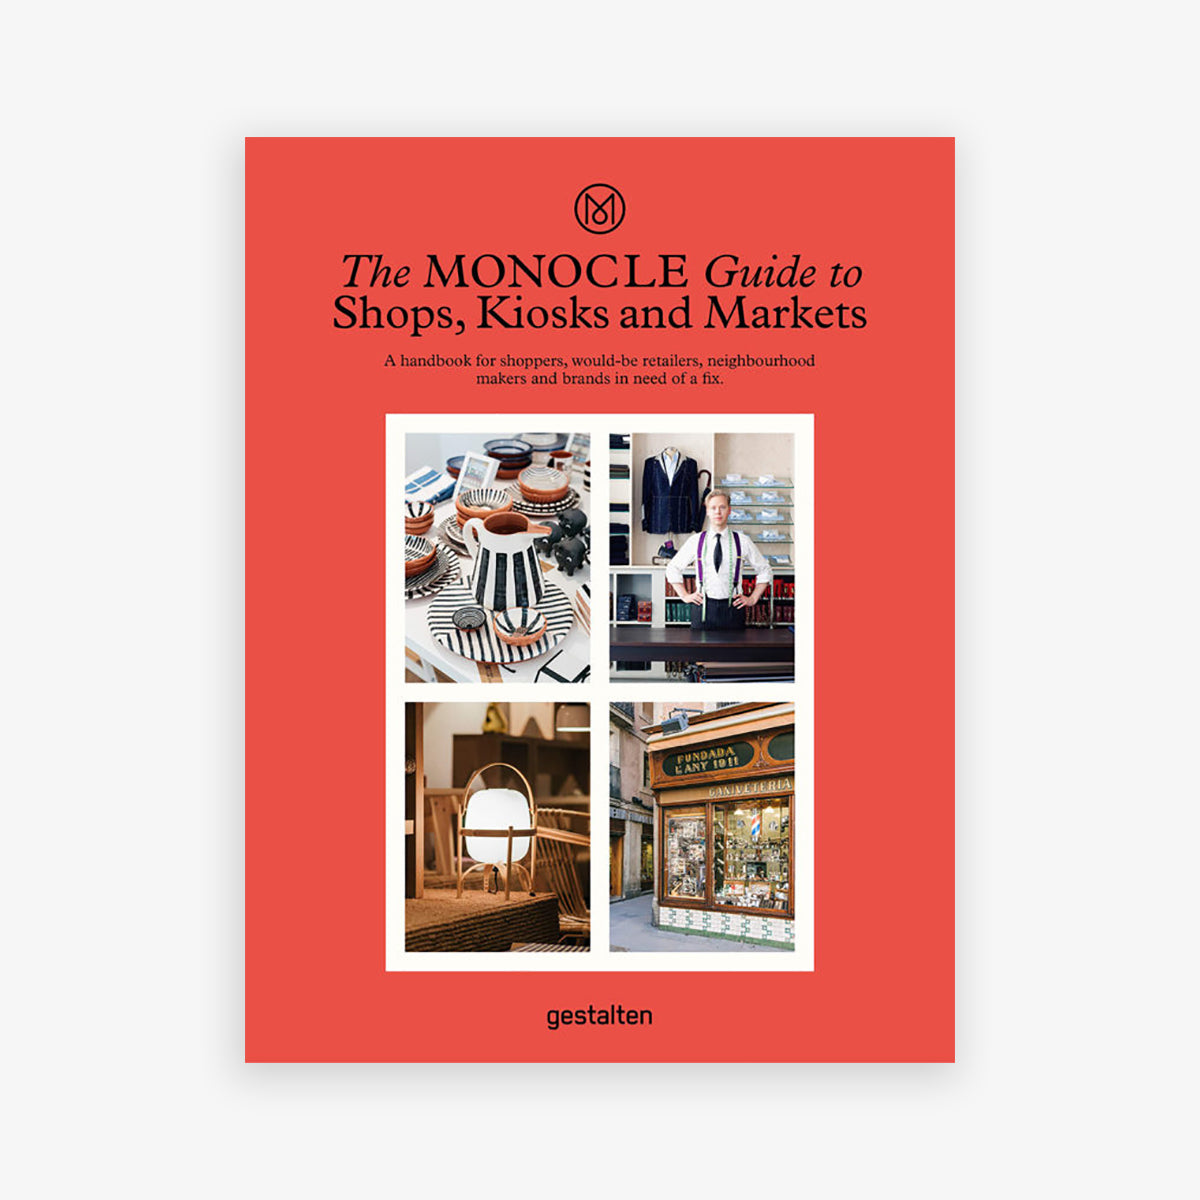 BOG 'THE MONOCLE GUIDE TO SHOPS, KIOSKS AND MARKETS'